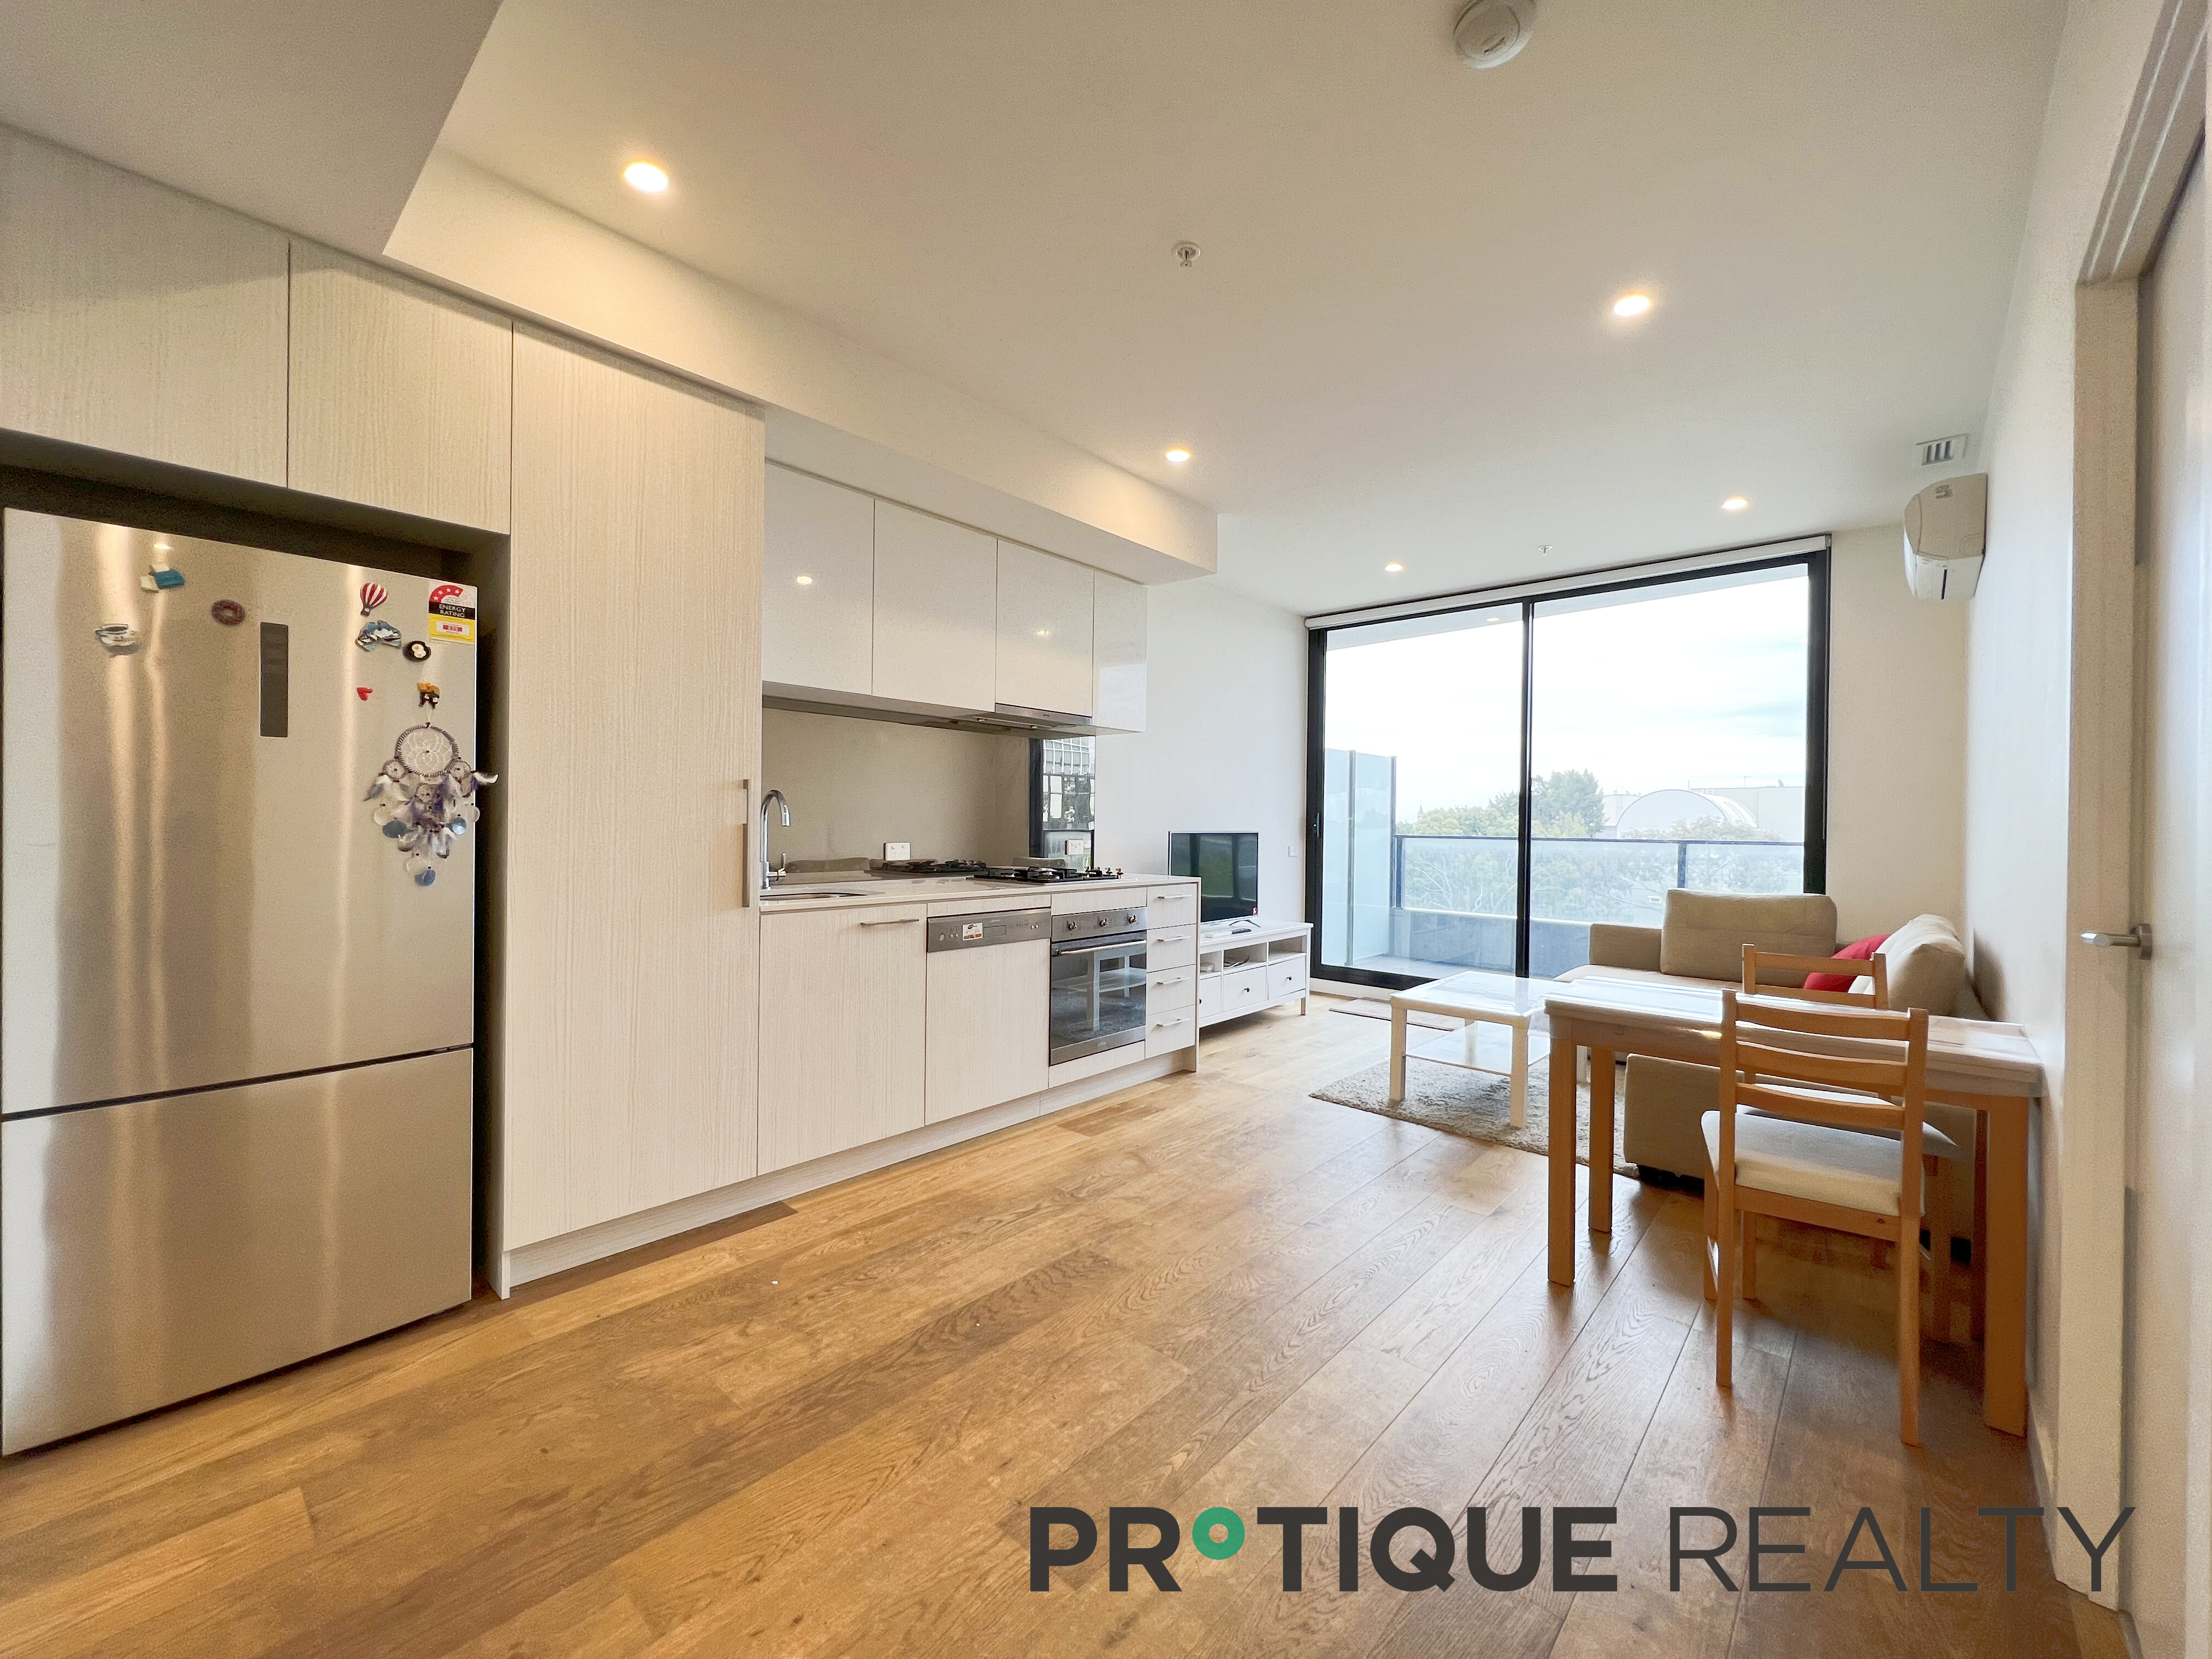 312/138 CAMBERWELL ROAD, Hawthorn East, VIC 3123, 2房, 2浴, Apartment